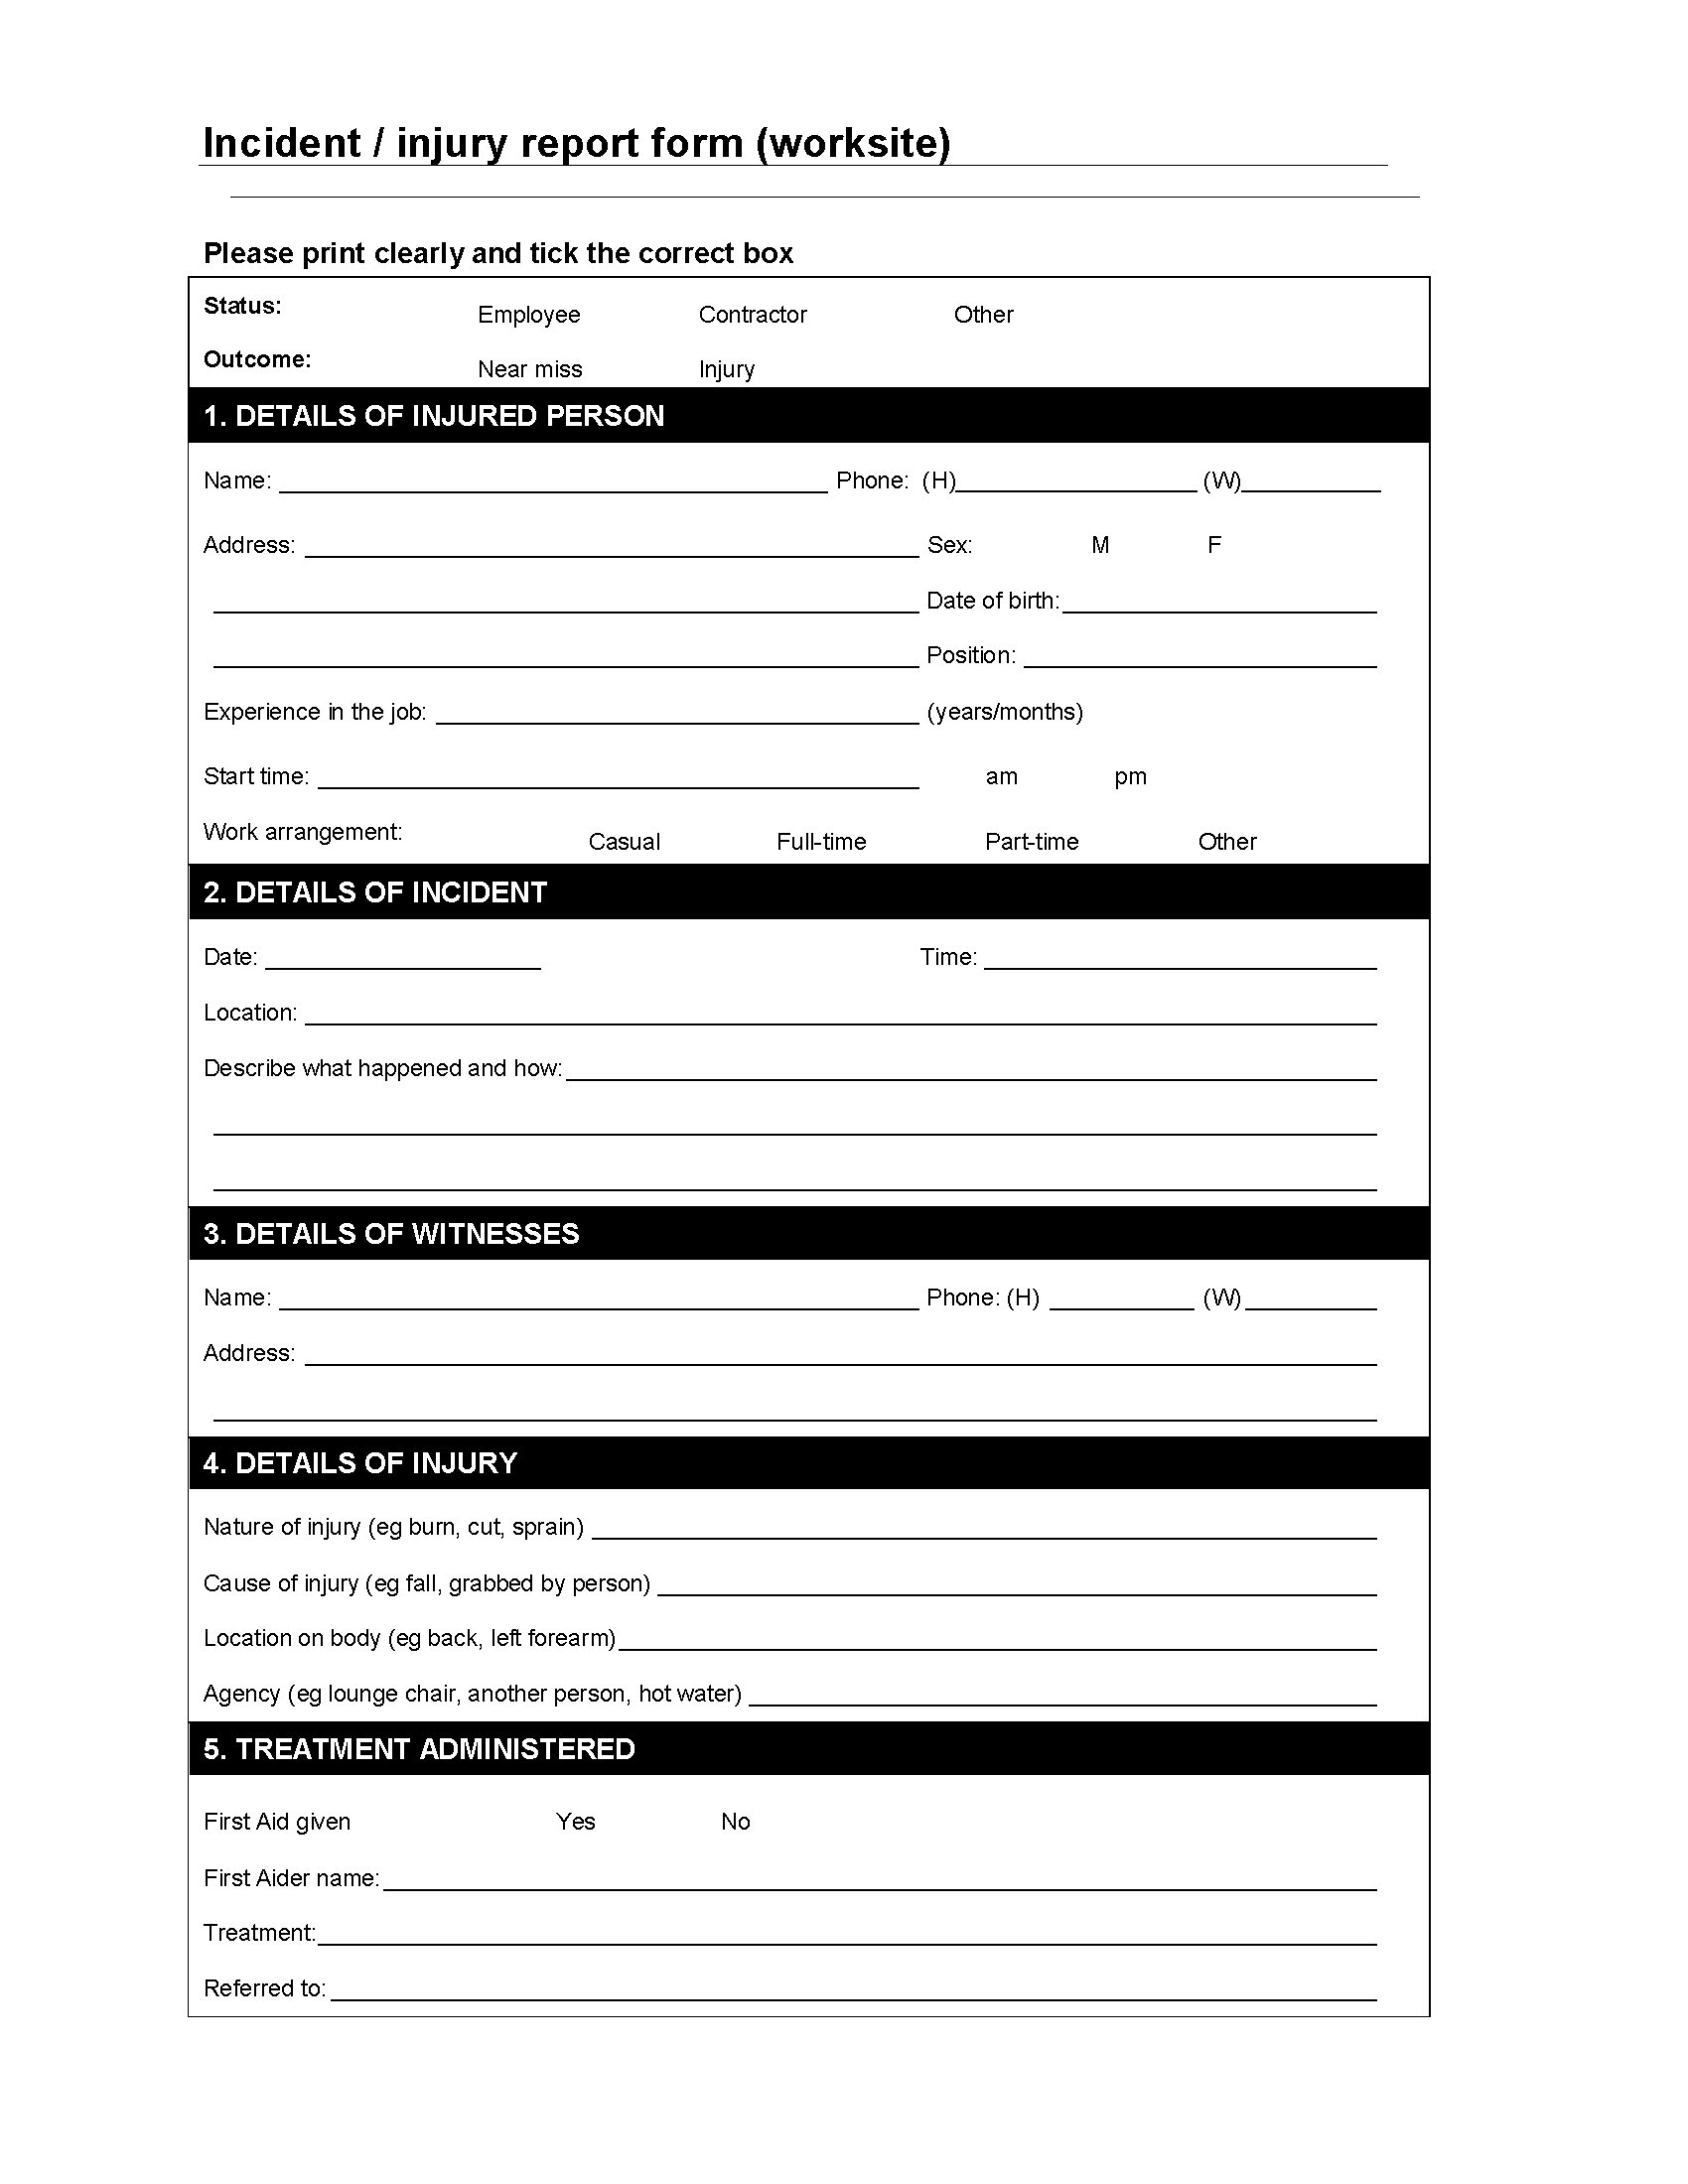 Worksite Incident / Injury Report Form  Legal Forms and Business  In Incident Hazard Report Form Template